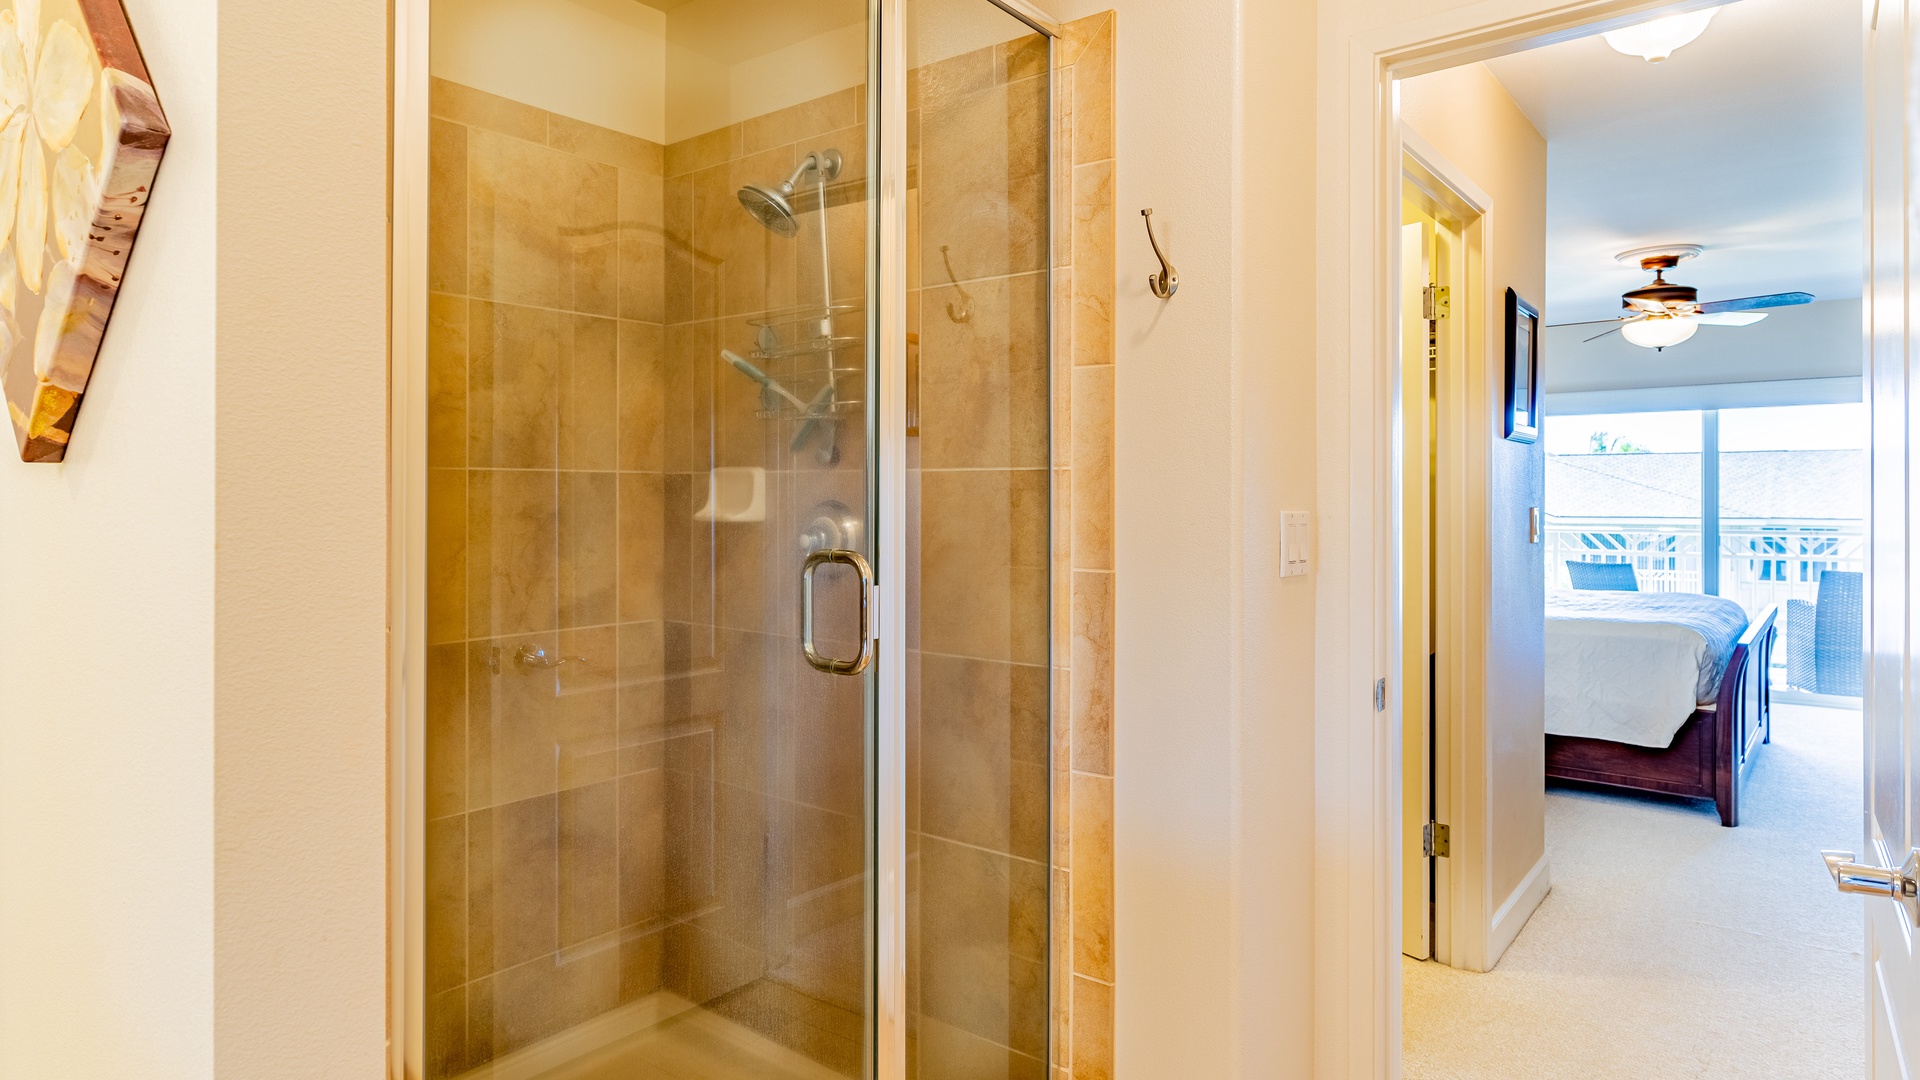 Kapolei Vacation Rentals, Ko Olina Kai 1033C - The primary guest bathroom with a walk-in shower.